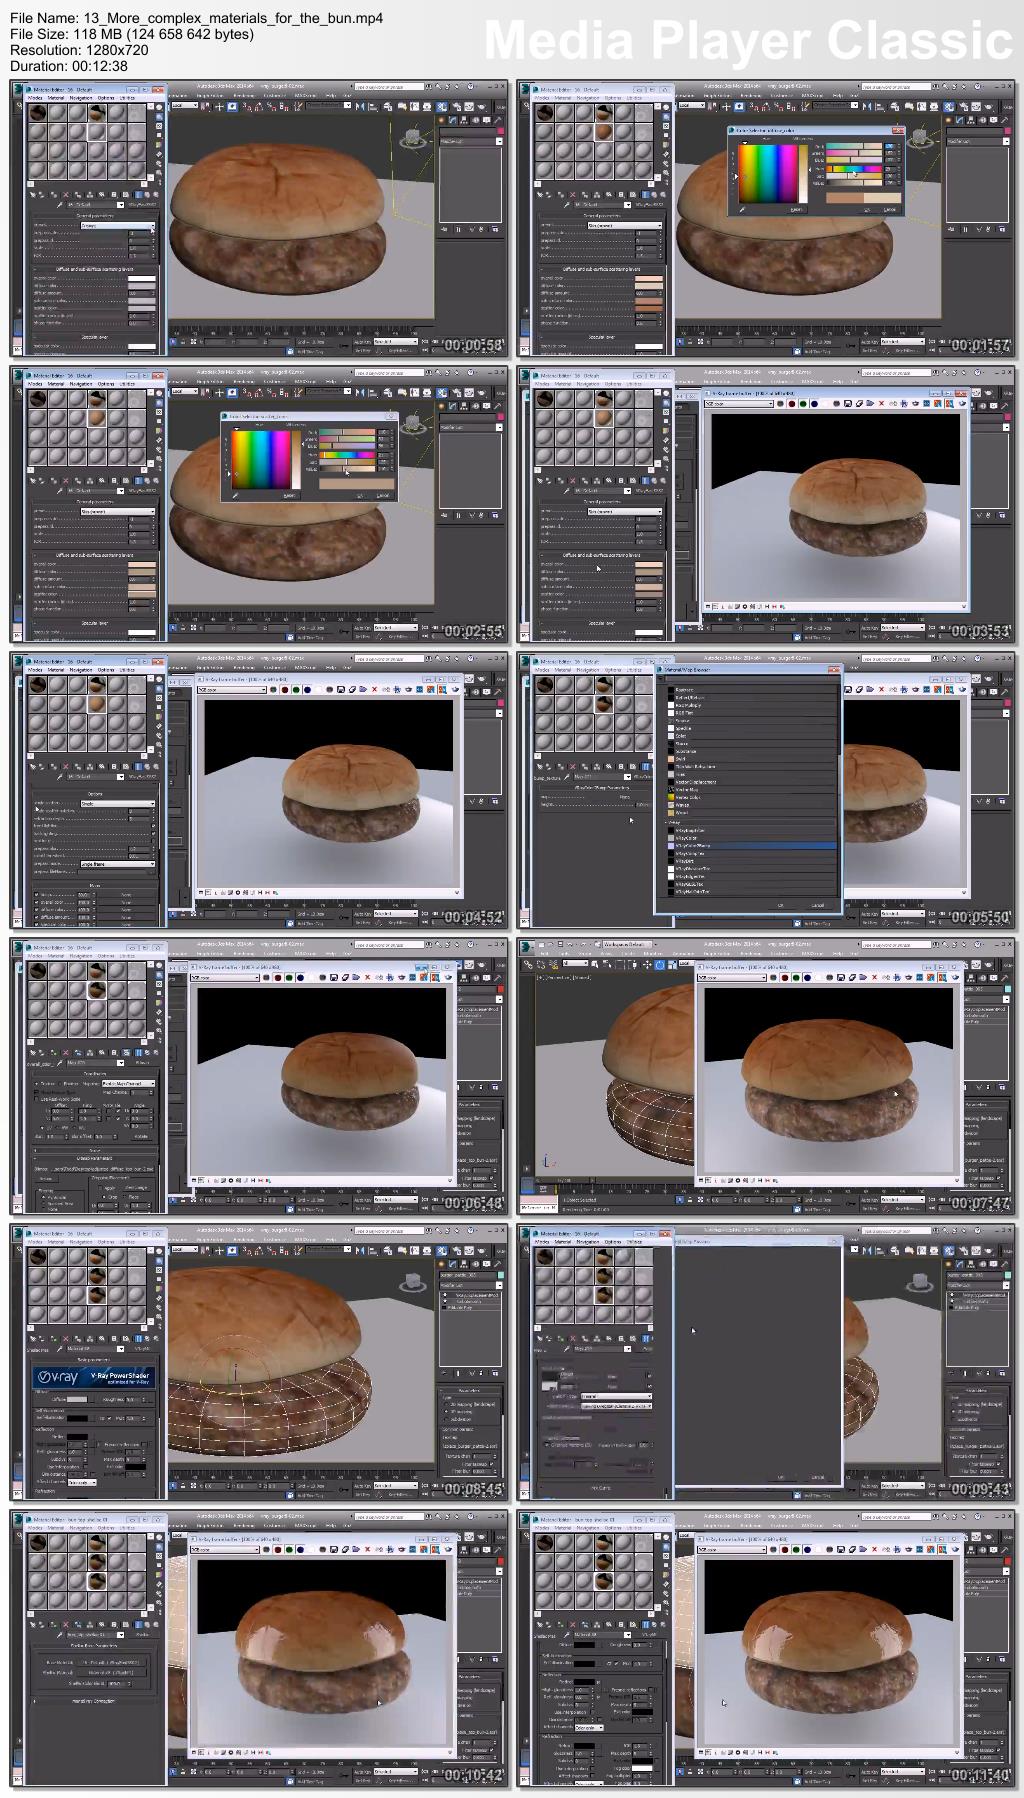 Dixxl Tuxxs - Creating Digital Food in 3ds Max and ZBrush